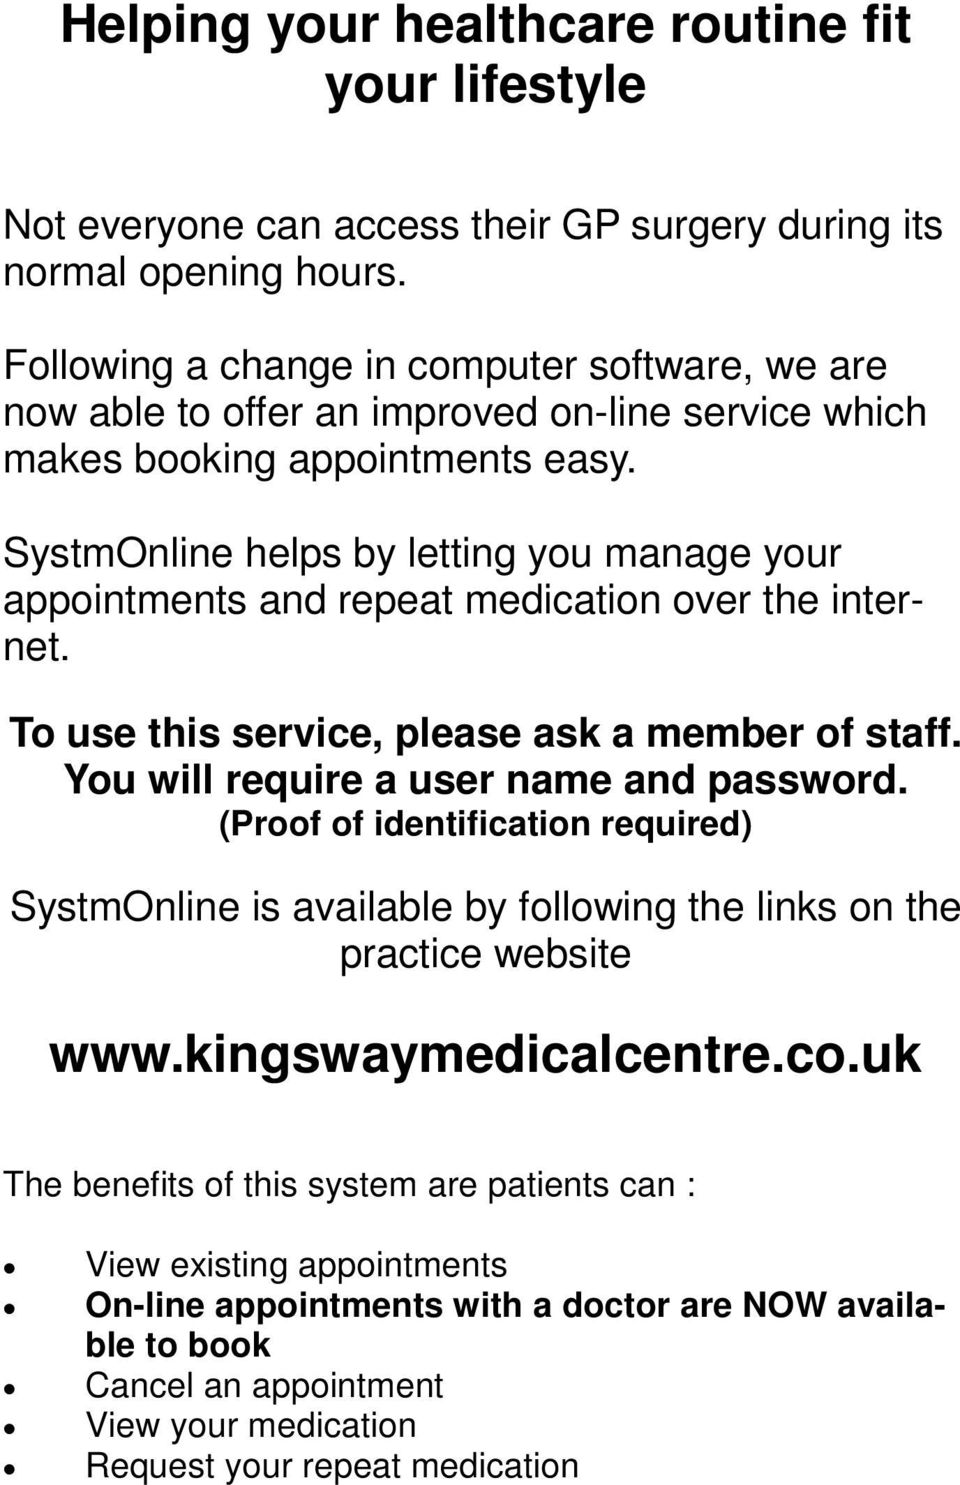 SystmOnline helps by letting you manage your appointments and repeat medication over the internet. To use this service, please ask a member of staff. You will require a user name and password.